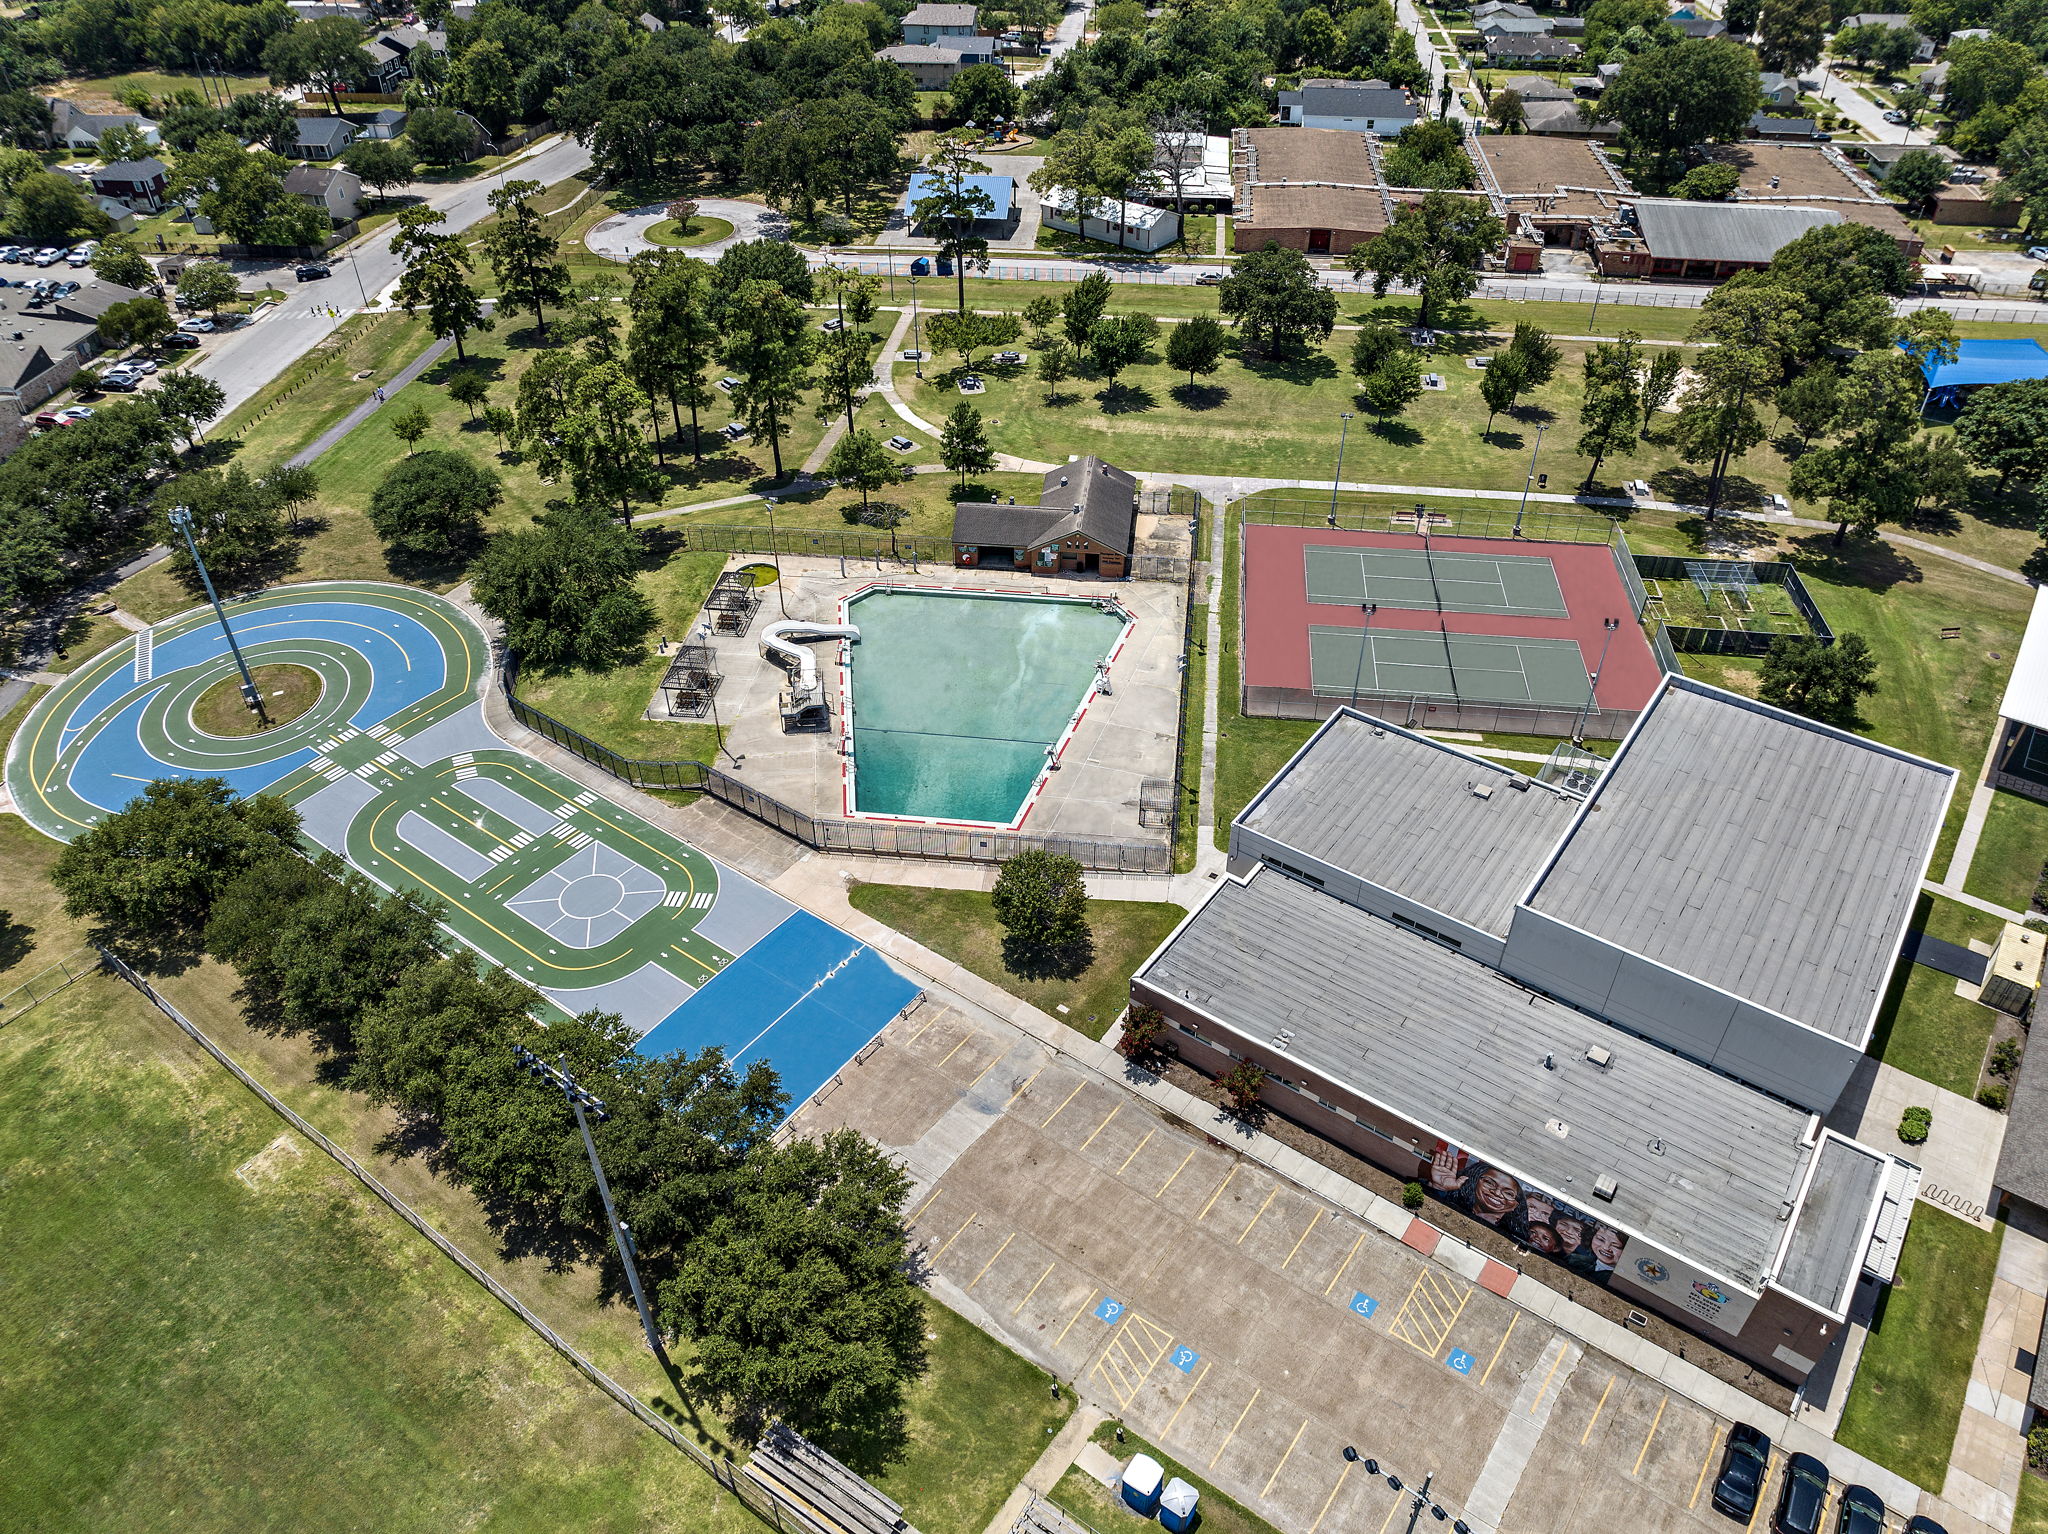 Aerial view of Finnigan Park showing the biking trail, swimming pool, and tennis courts